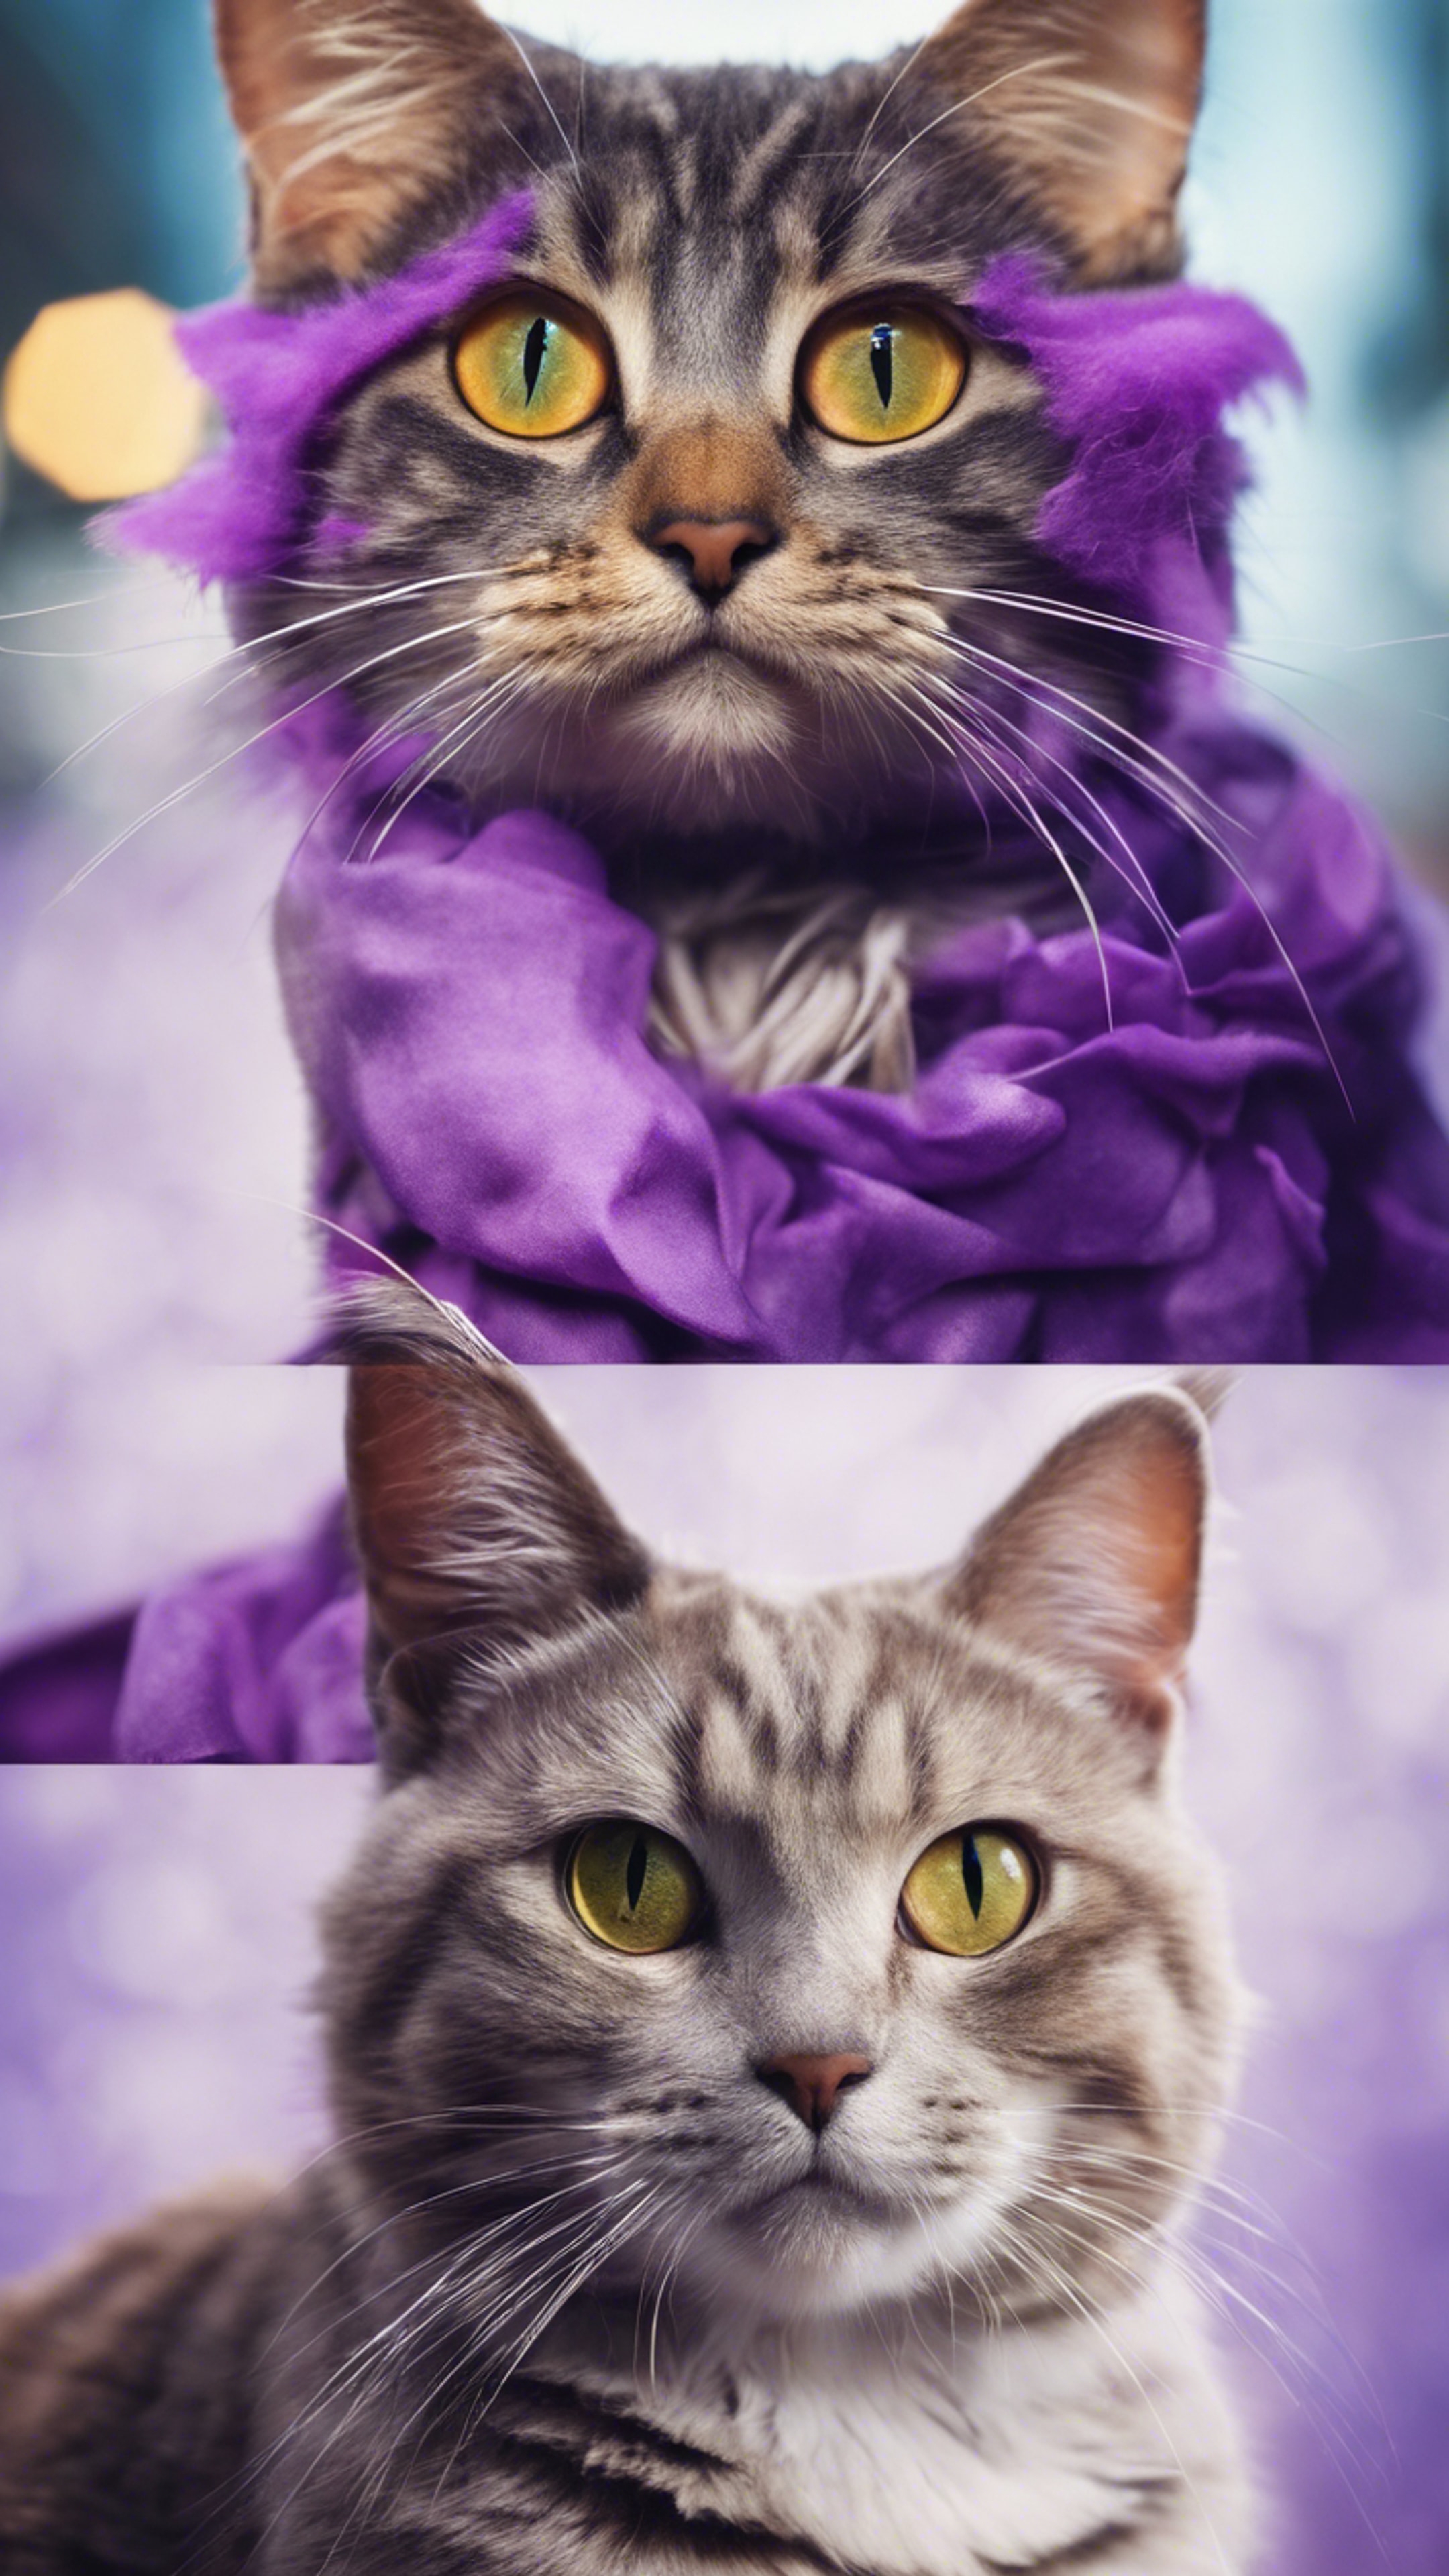 A playful collage showcasing various breeds of cats, all with unusual purple fur. Wallpaper[3a46628192d3463088be]